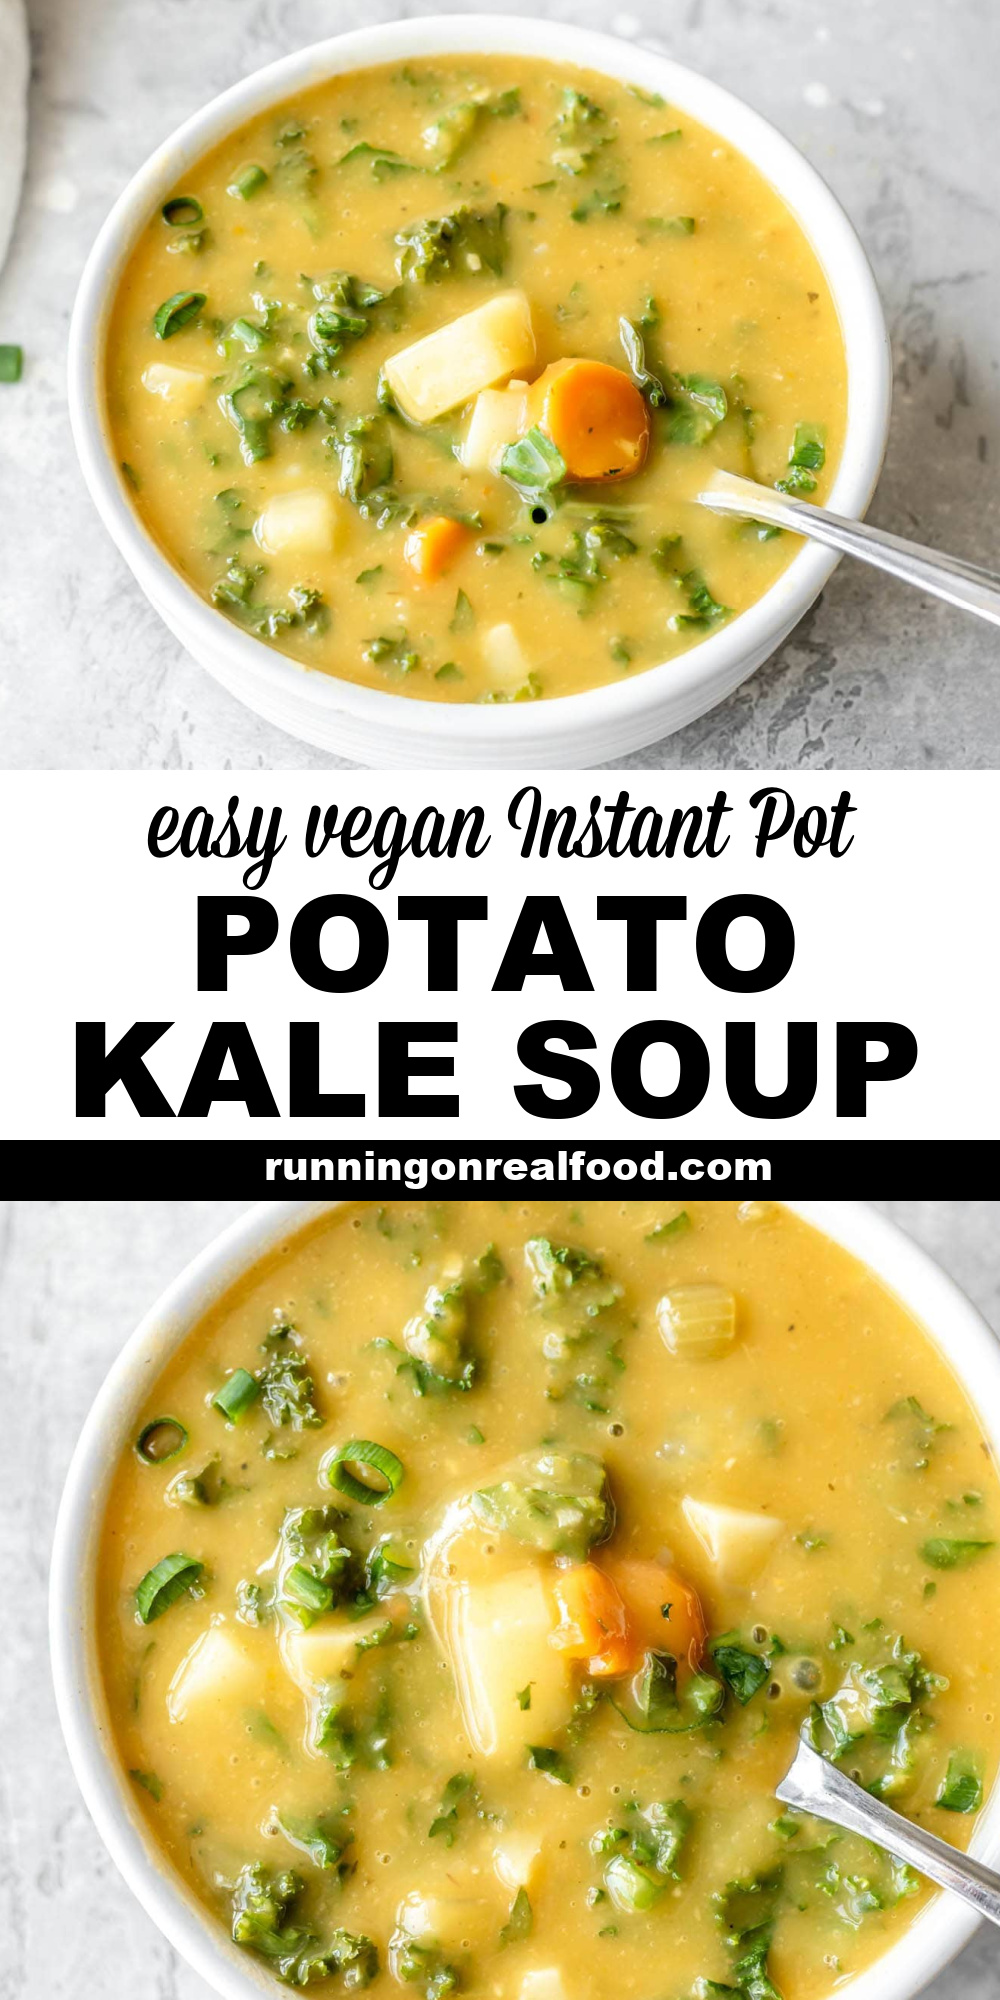 Pinterest graphic with an image and text for potato kale soup.